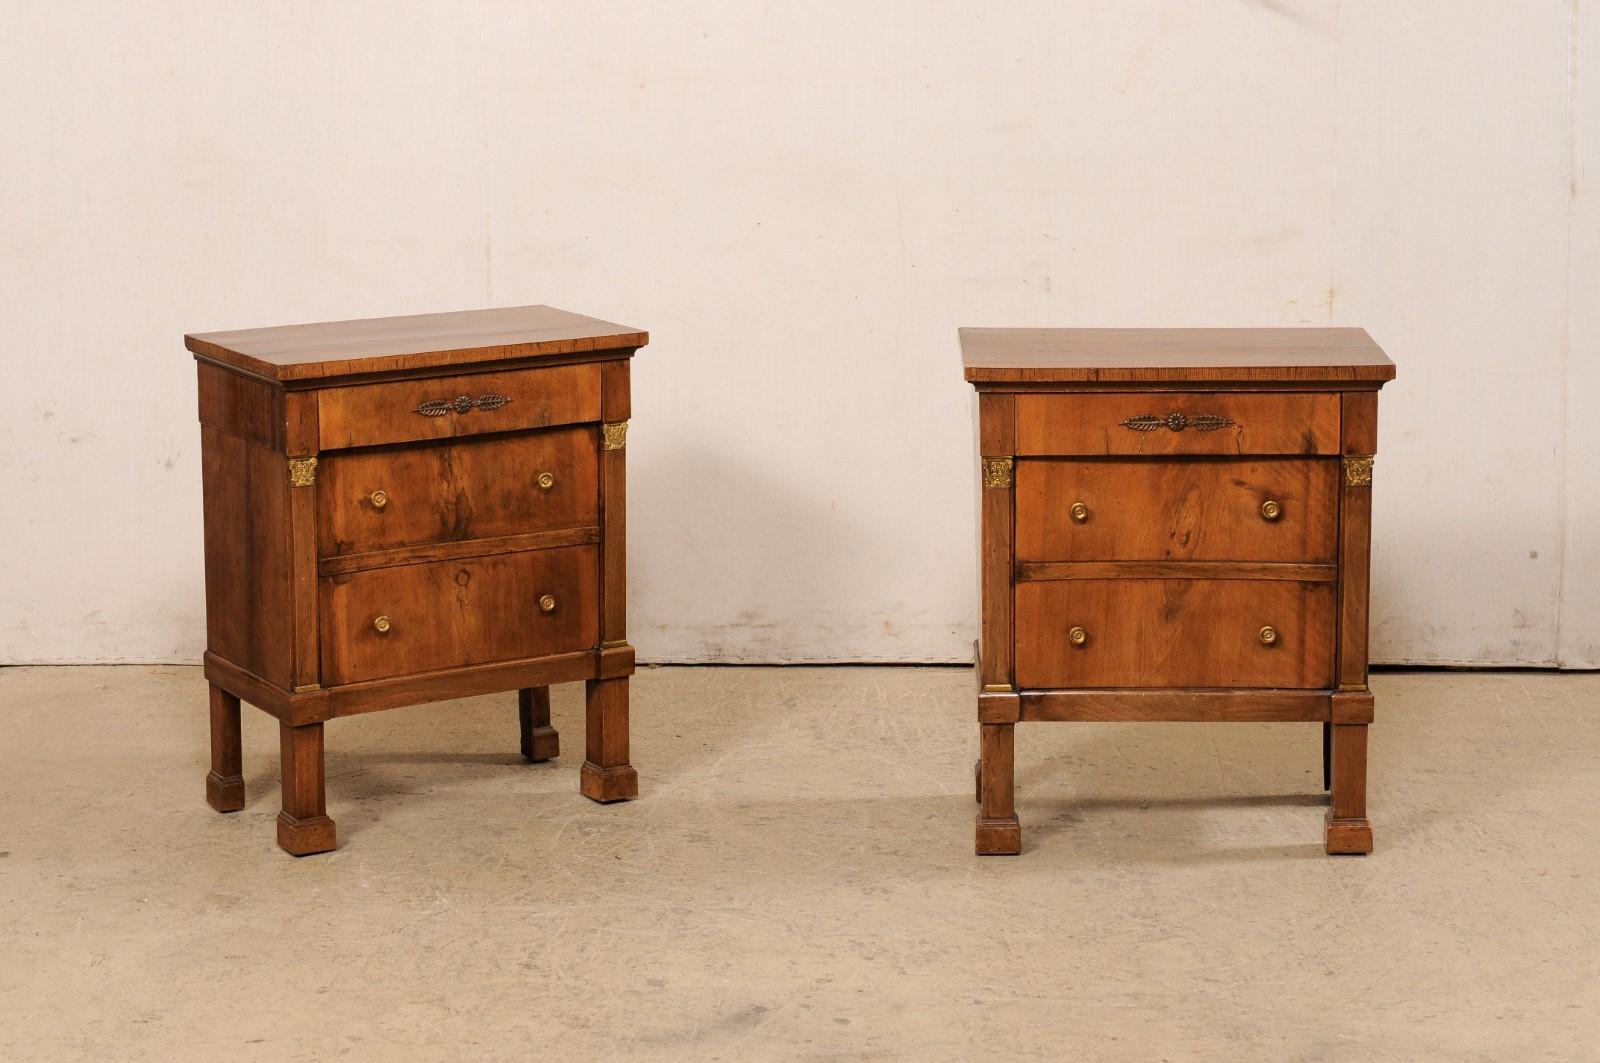 An Italian pair of Neoclassic comodini from the early 19th century. This antique pair of smaller-sized chests from Italy each feature rectangular wooden tops above a case which houses a drawer set with in the top frieze, and a single door beneath